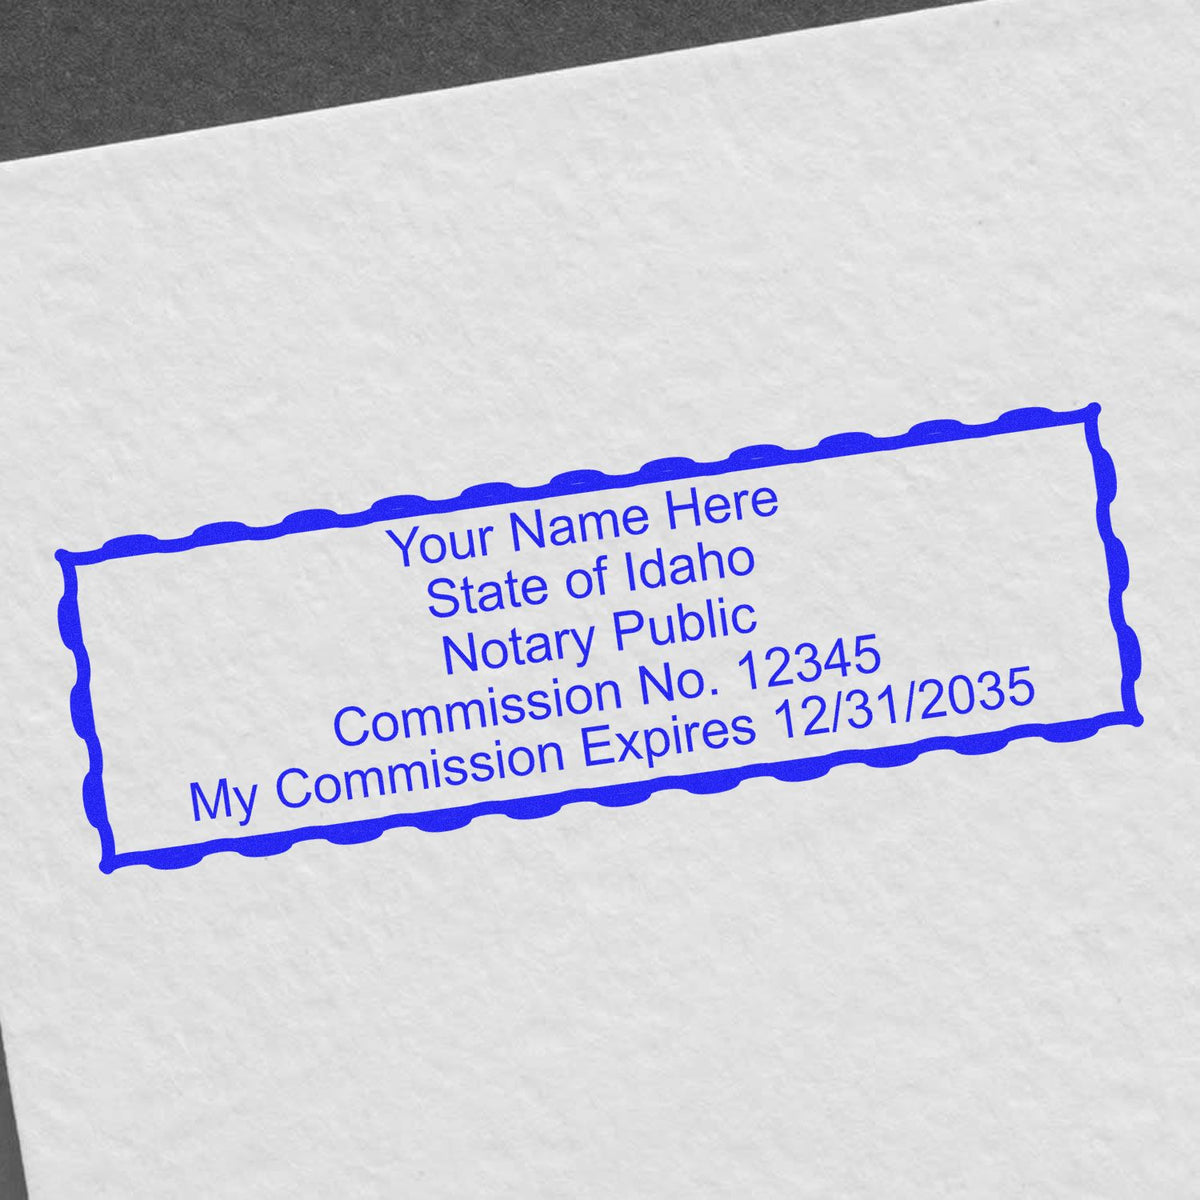 A lifestyle photo showing a stamped image of the Wooden Handle Idaho Rectangular Notary Public Stamp on a piece of paper